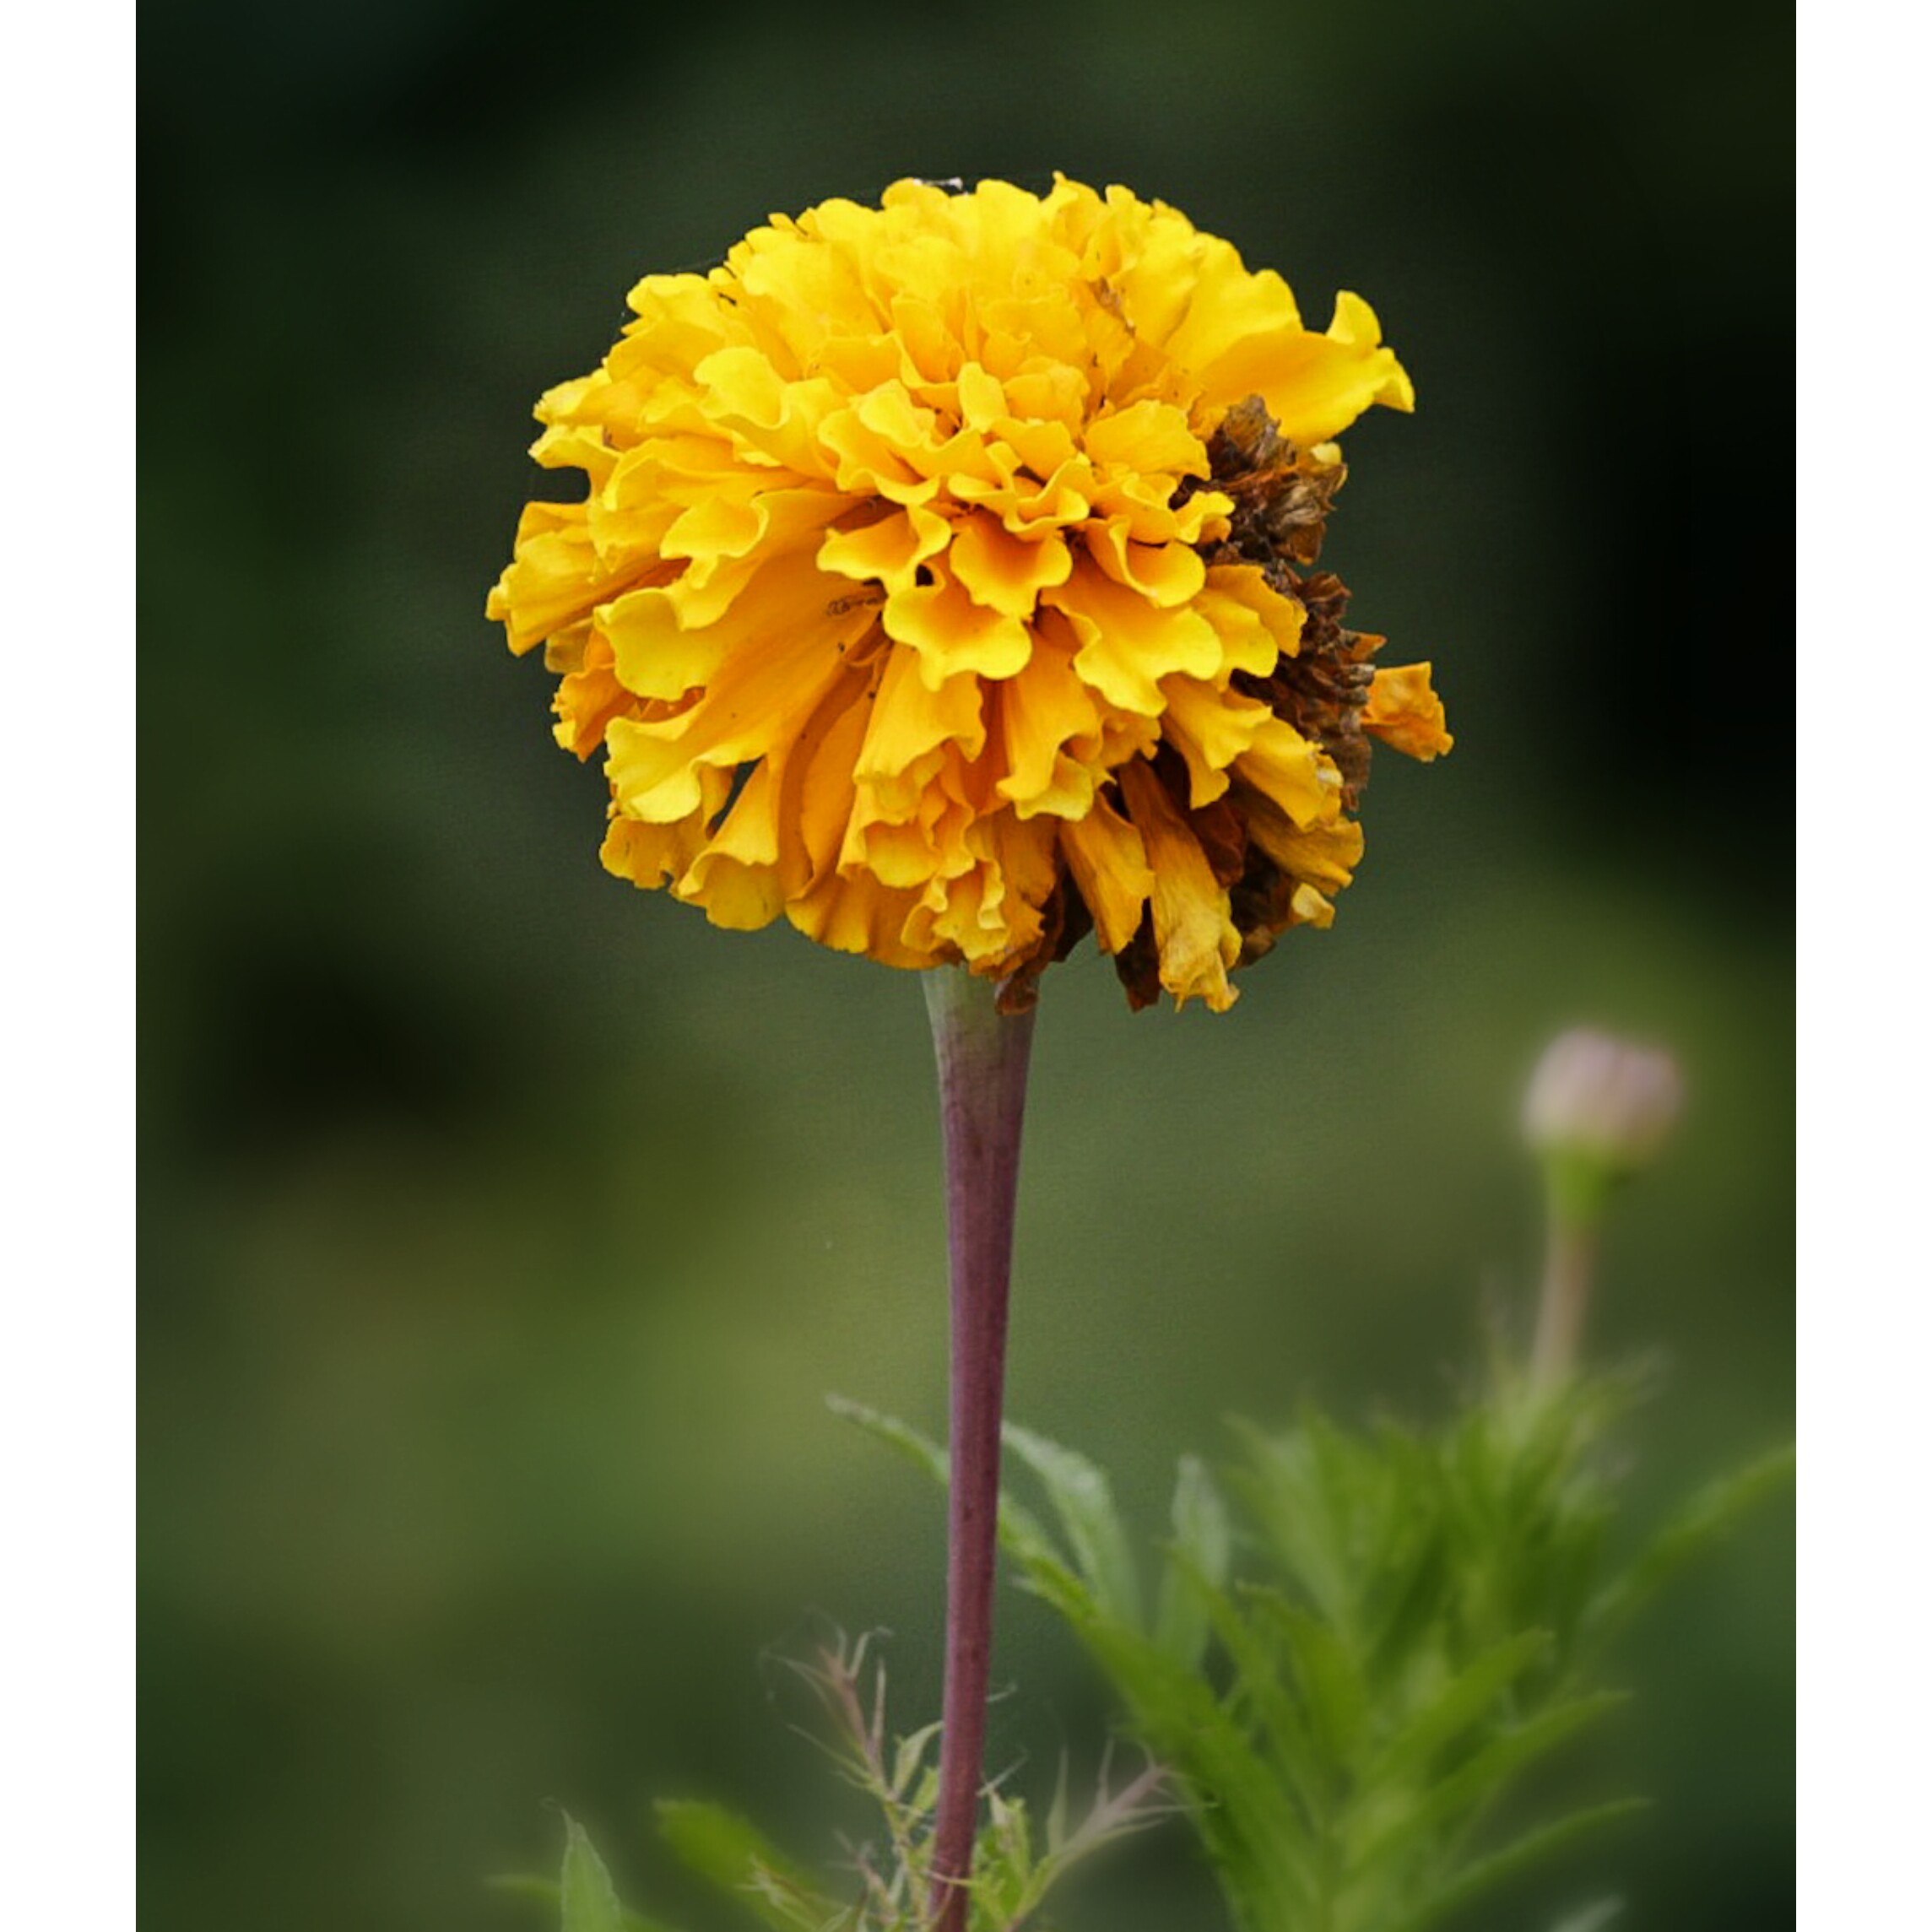 Yellow Marigold flower with missing petals